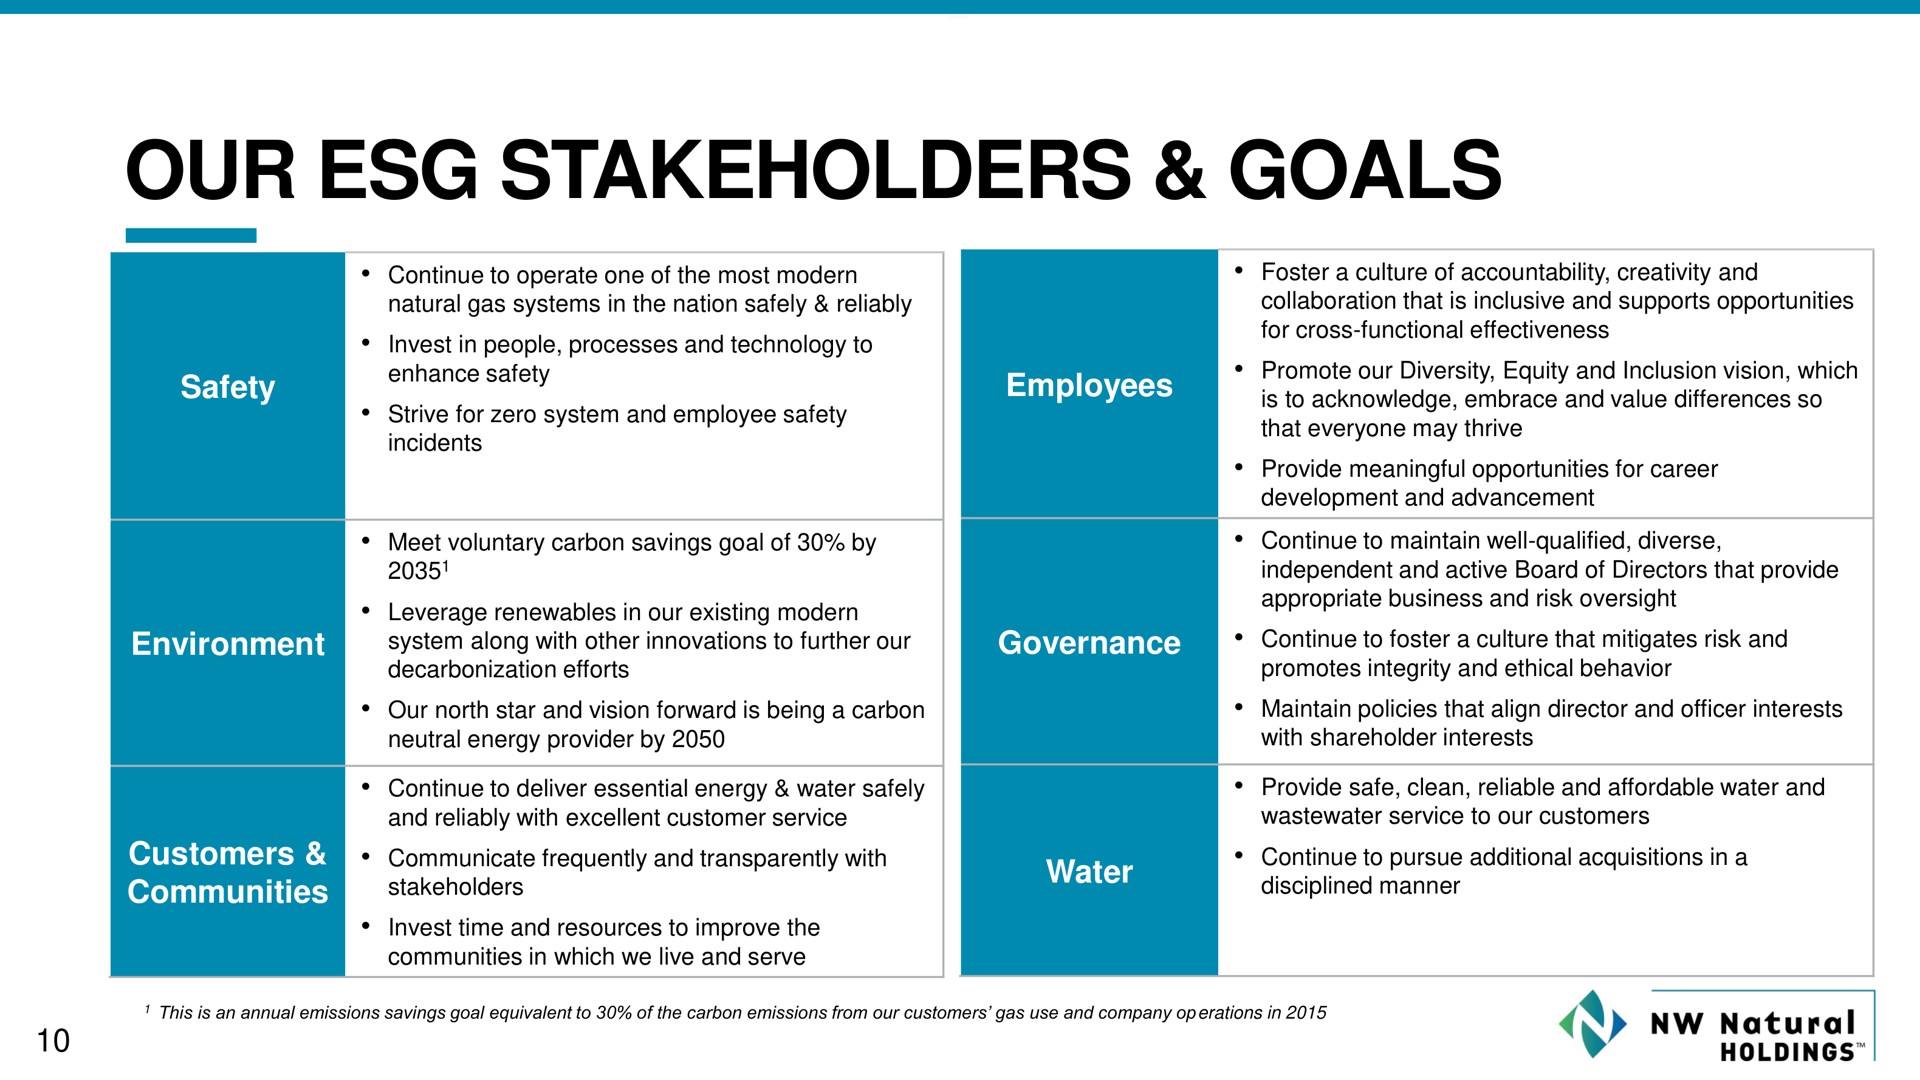 our stakeholders goals | NW Natural Holdings